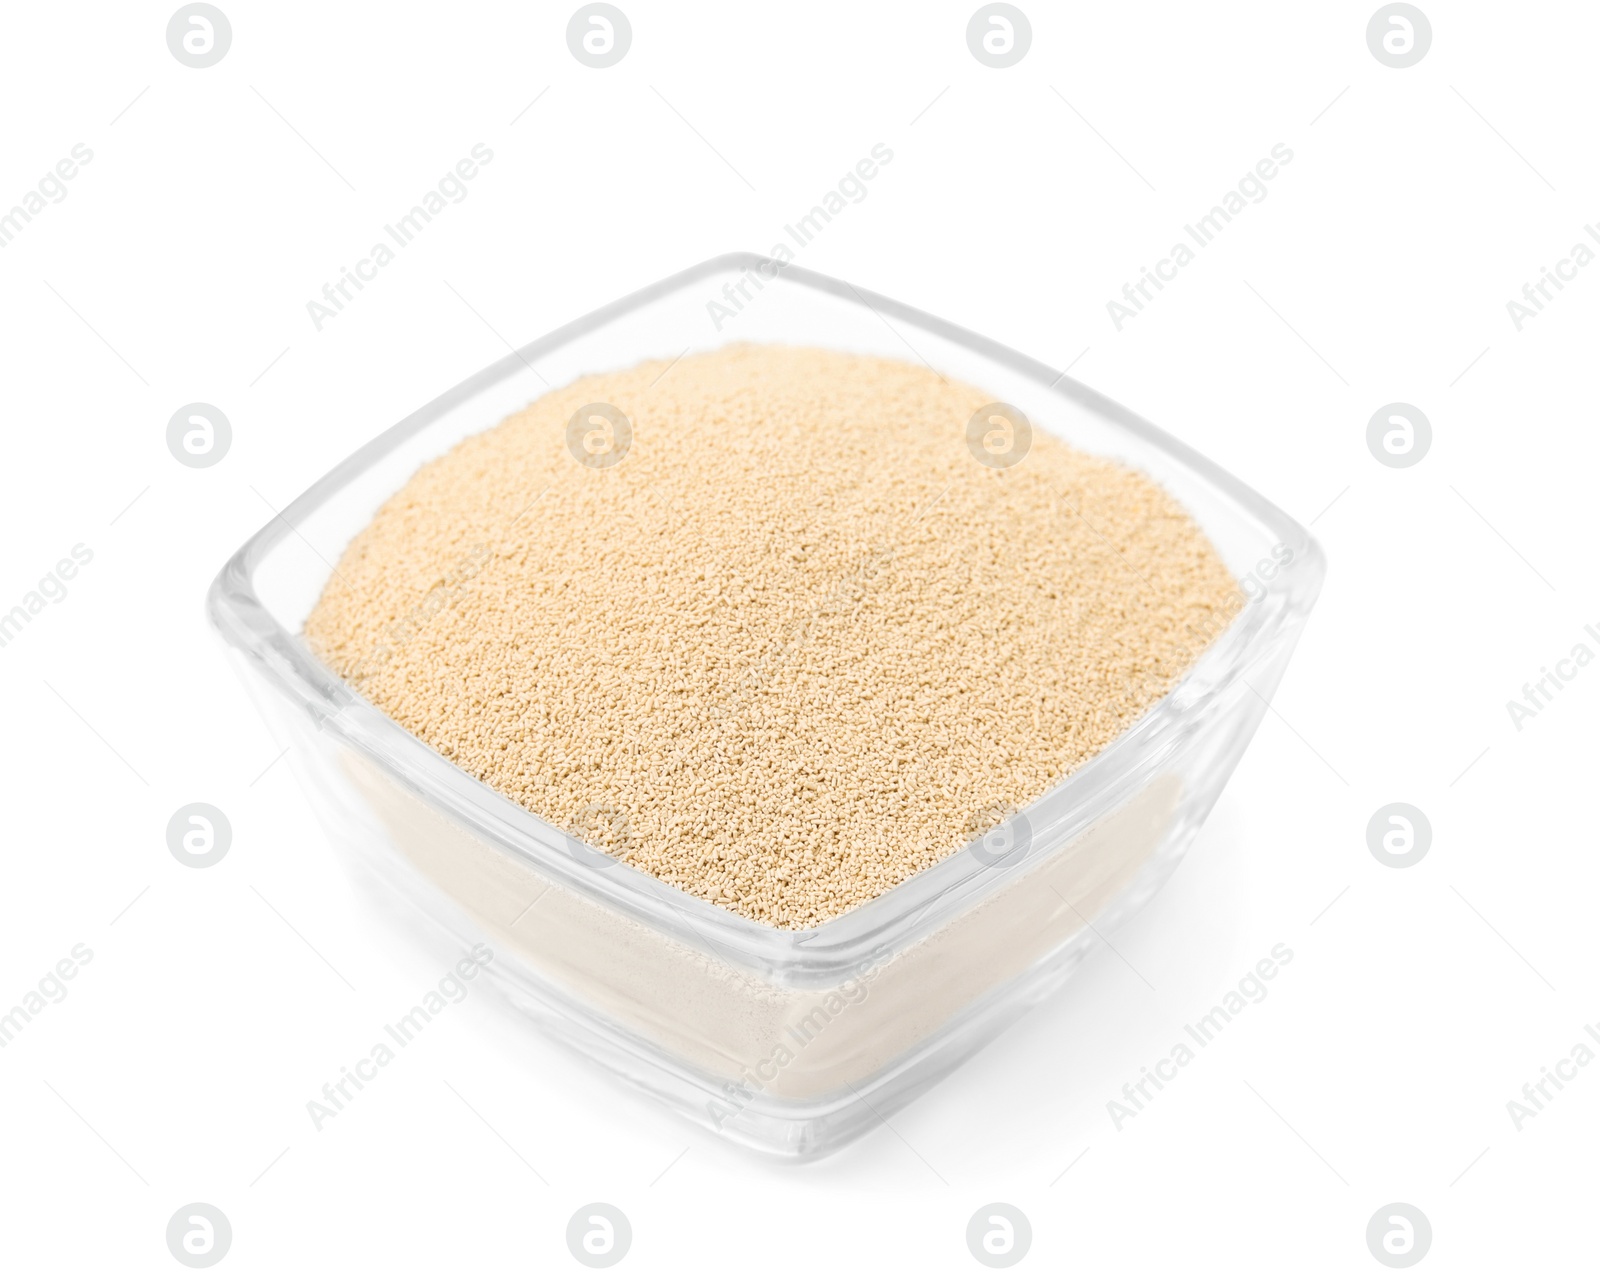 Photo of Granulated yeast in glass bowl isolated on white